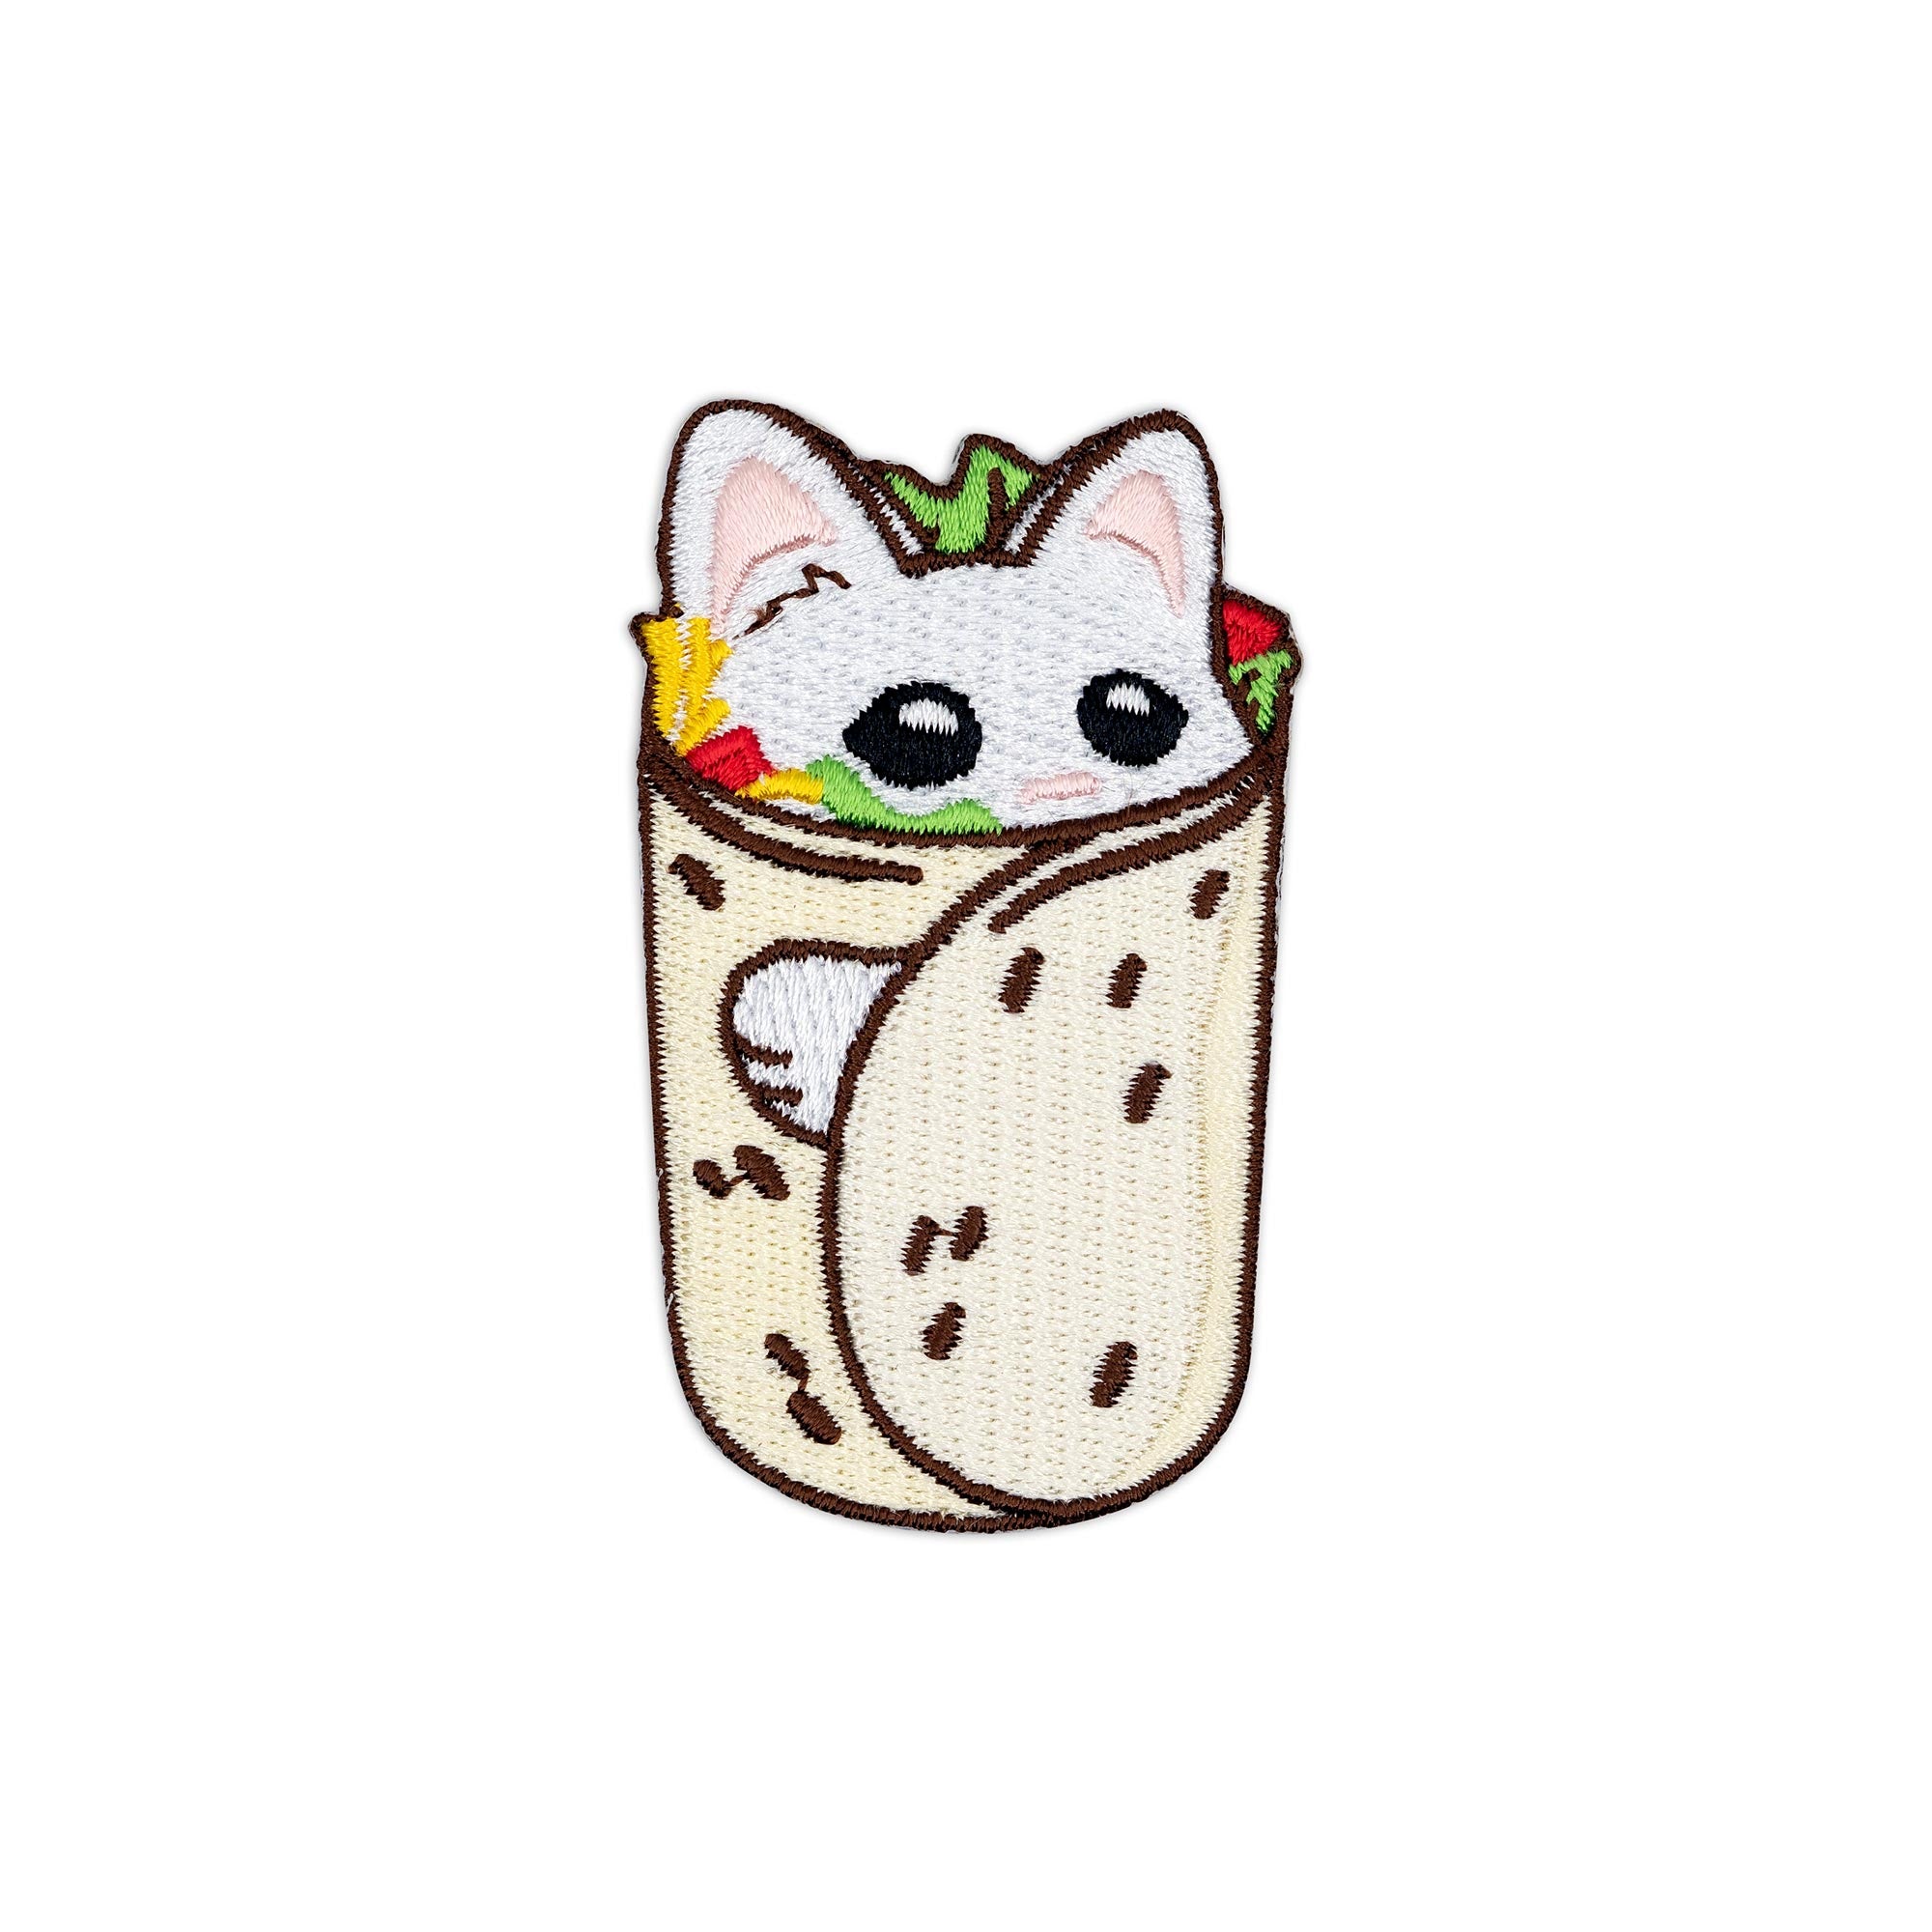 Burrito Cat Embroidered Iron-On Patch – Winks For Days